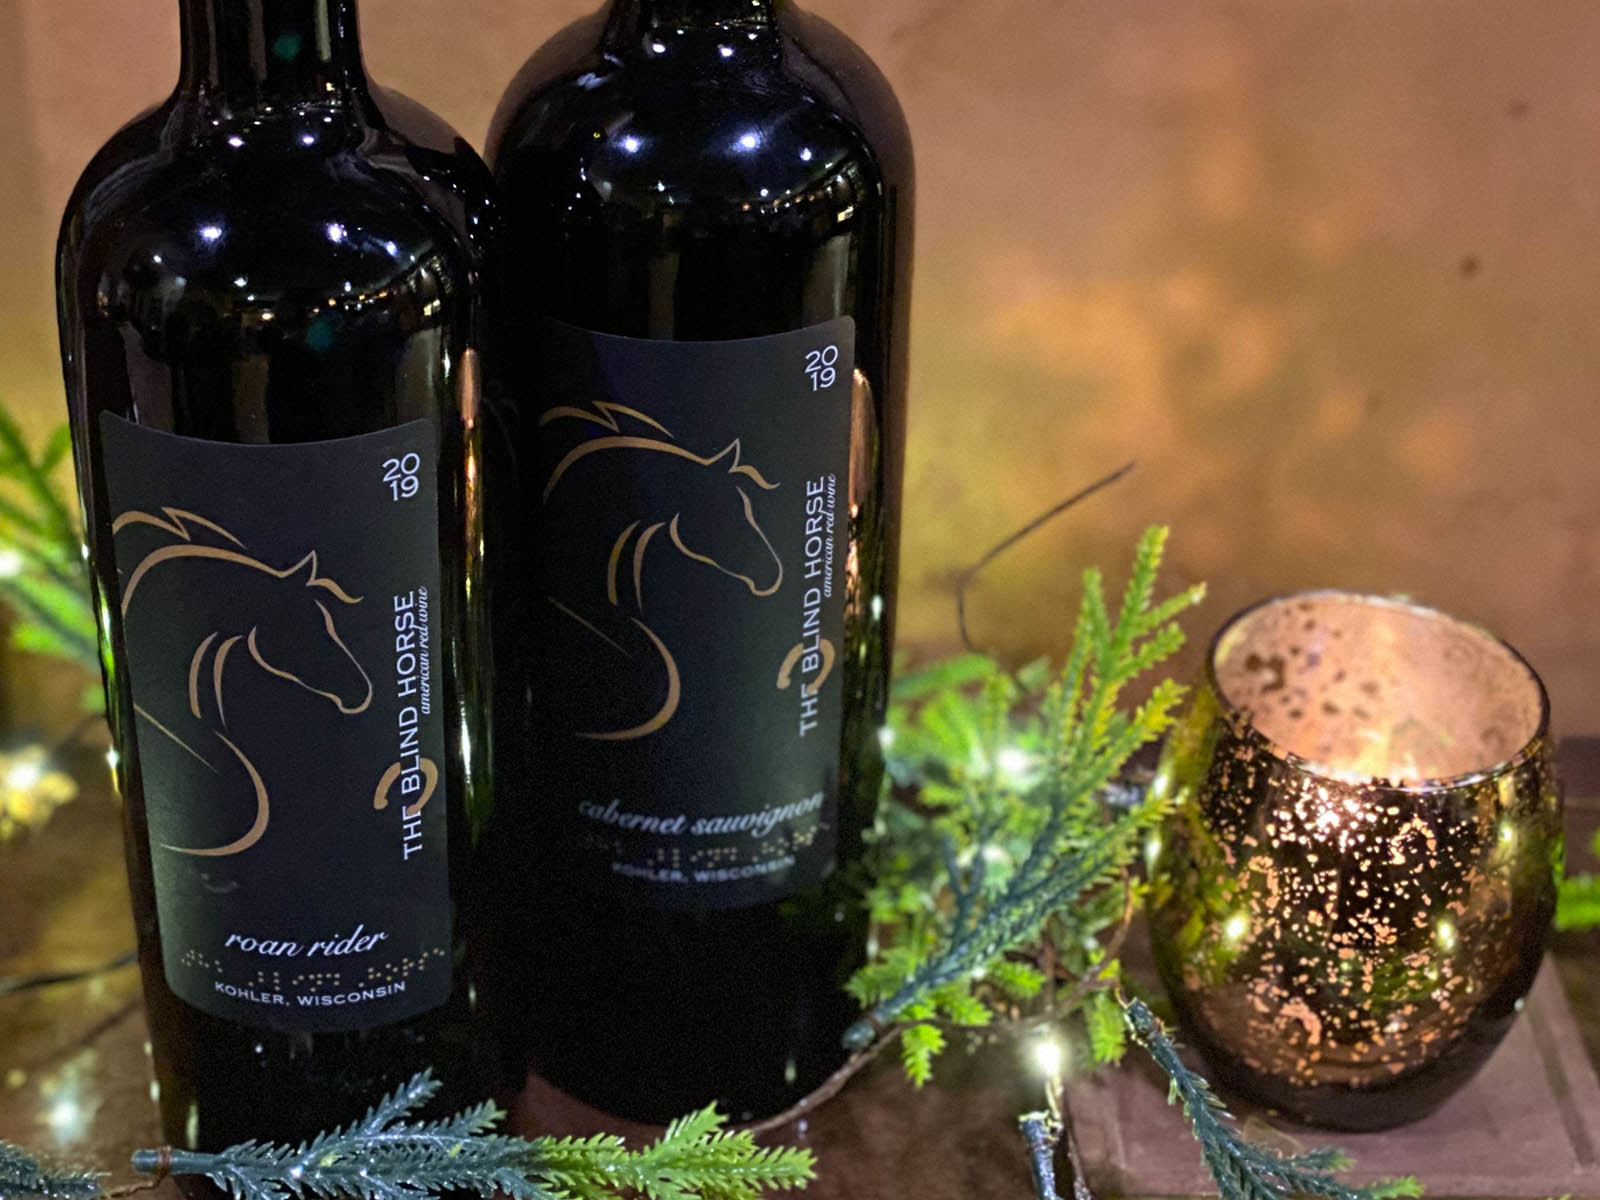 About the Wine Maker - The Blind Horse Restaurant & Winery